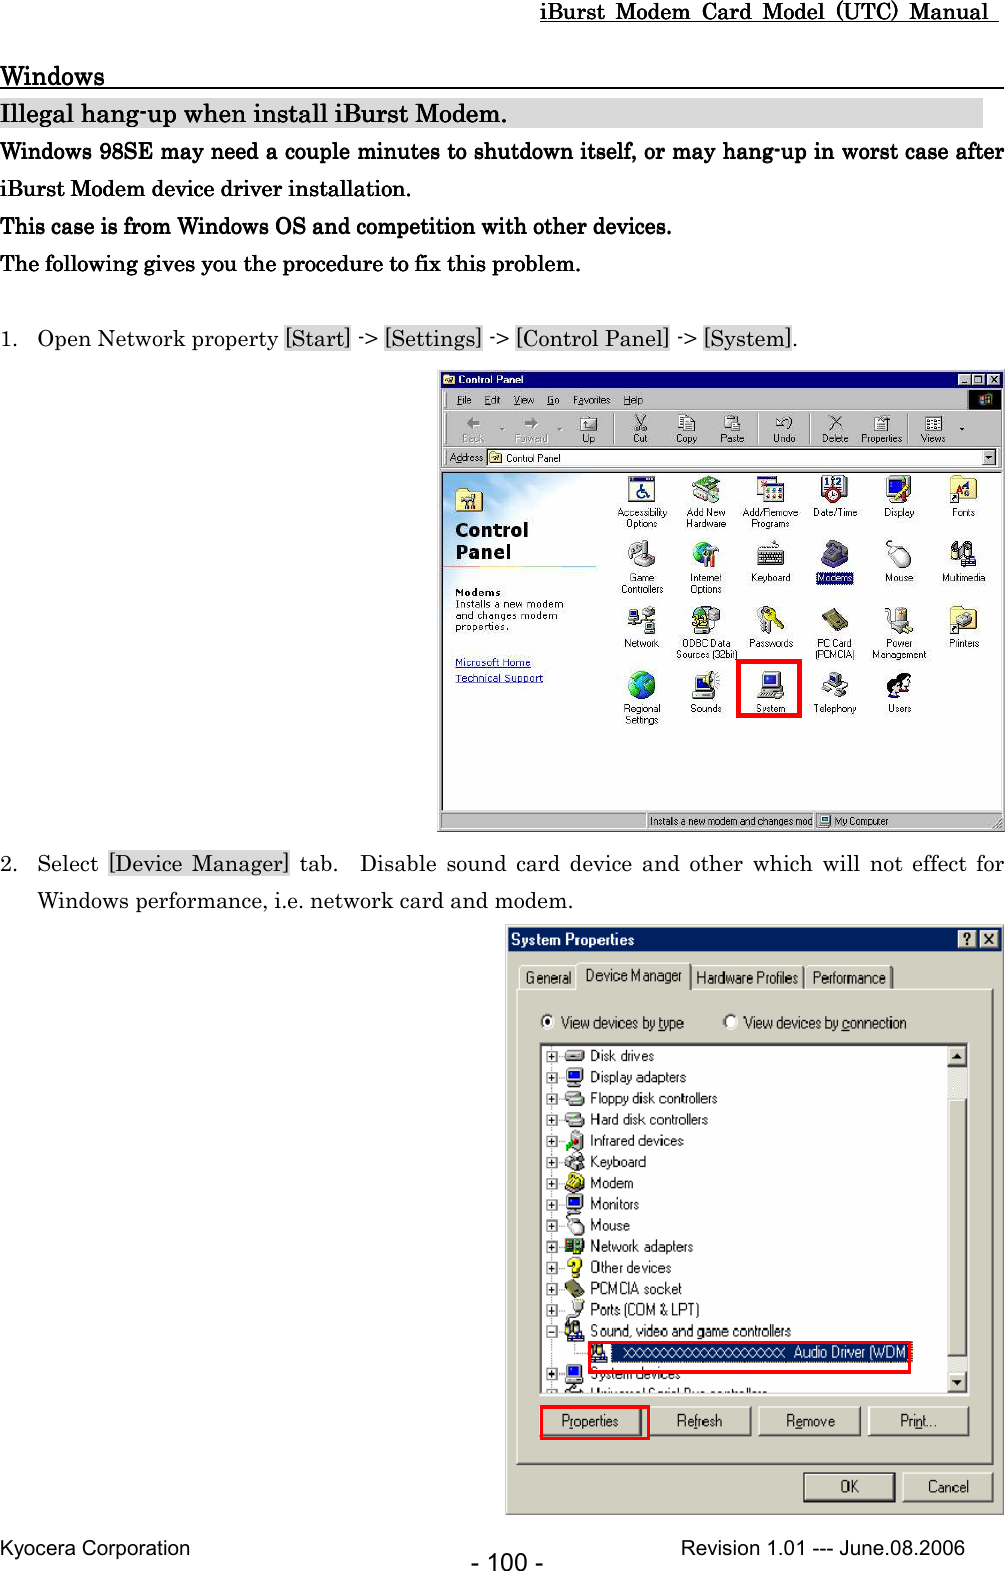 iBurst  Modem  Card  Model  (UTC)  Manual iBurst  Modem  Card  Model  (UTC)  Manual iBurst  Modem  Card  Model  (UTC)  Manual iBurst  Modem  Card  Model  (UTC)  Manual       Kyocera Corporation                                                                                              Revision 1.01 --- June.08.2006 - 100 - WindowsWindowsWindowsWindows                                                                                                                                                                                                                                                                                                    Illegal hanIllegal hanIllegal hanIllegal hangggg----up when install up when install up when install up when install iBurst ModemiBurst ModemiBurst ModemiBurst Modem....                                                                                                                                                            Windows 98SE may need a couple minutes to shutdown itself,Windows 98SE may need a couple minutes to shutdown itself,Windows 98SE may need a couple minutes to shutdown itself,Windows 98SE may need a couple minutes to shutdown itself,    oooor may hangr may hangr may hangr may hang----up in worst case after up in worst case after up in worst case after up in worst case after iBurst ModemiBurst ModemiBurst ModemiBurst Modem device driver installation. device driver installation. device driver installation. device driver installation.    This case is from Windows OS and competition with oThis case is from Windows OS and competition with oThis case is from Windows OS and competition with oThis case is from Windows OS and competition with other devices.ther devices.ther devices.ther devices.    The followingThe followingThe followingThe following    gives you the procedure to fix this problem.gives you the procedure to fix this problem.gives you the procedure to fix this problem.gives you the procedure to fix this problem.     1. Open Network property [Start] -&gt; [Settings] -&gt; [Control Panel] -&gt; [System].  2. Select  [Device  Manager]  tab.    Disable  sound  card device  and  other  which  will  not  effect  for Windows performance, i.e. network card and modem.  